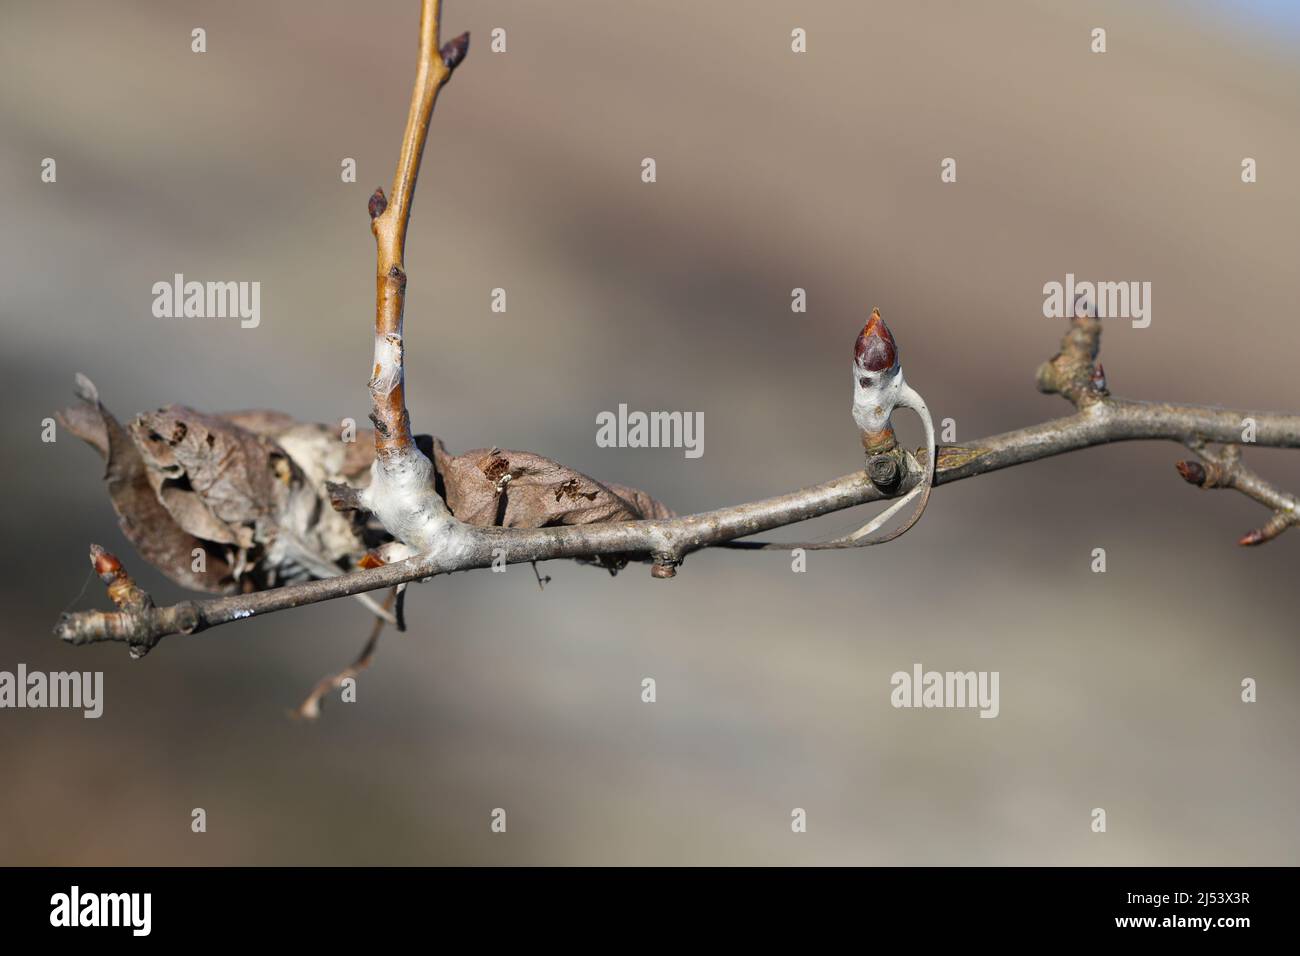 Brown tail caterpillars (Euproctis chrysorrhoea) on a branch of a pear tree in winter caterpillars nest. Important pests of many trees and shrubs. Stock Photo